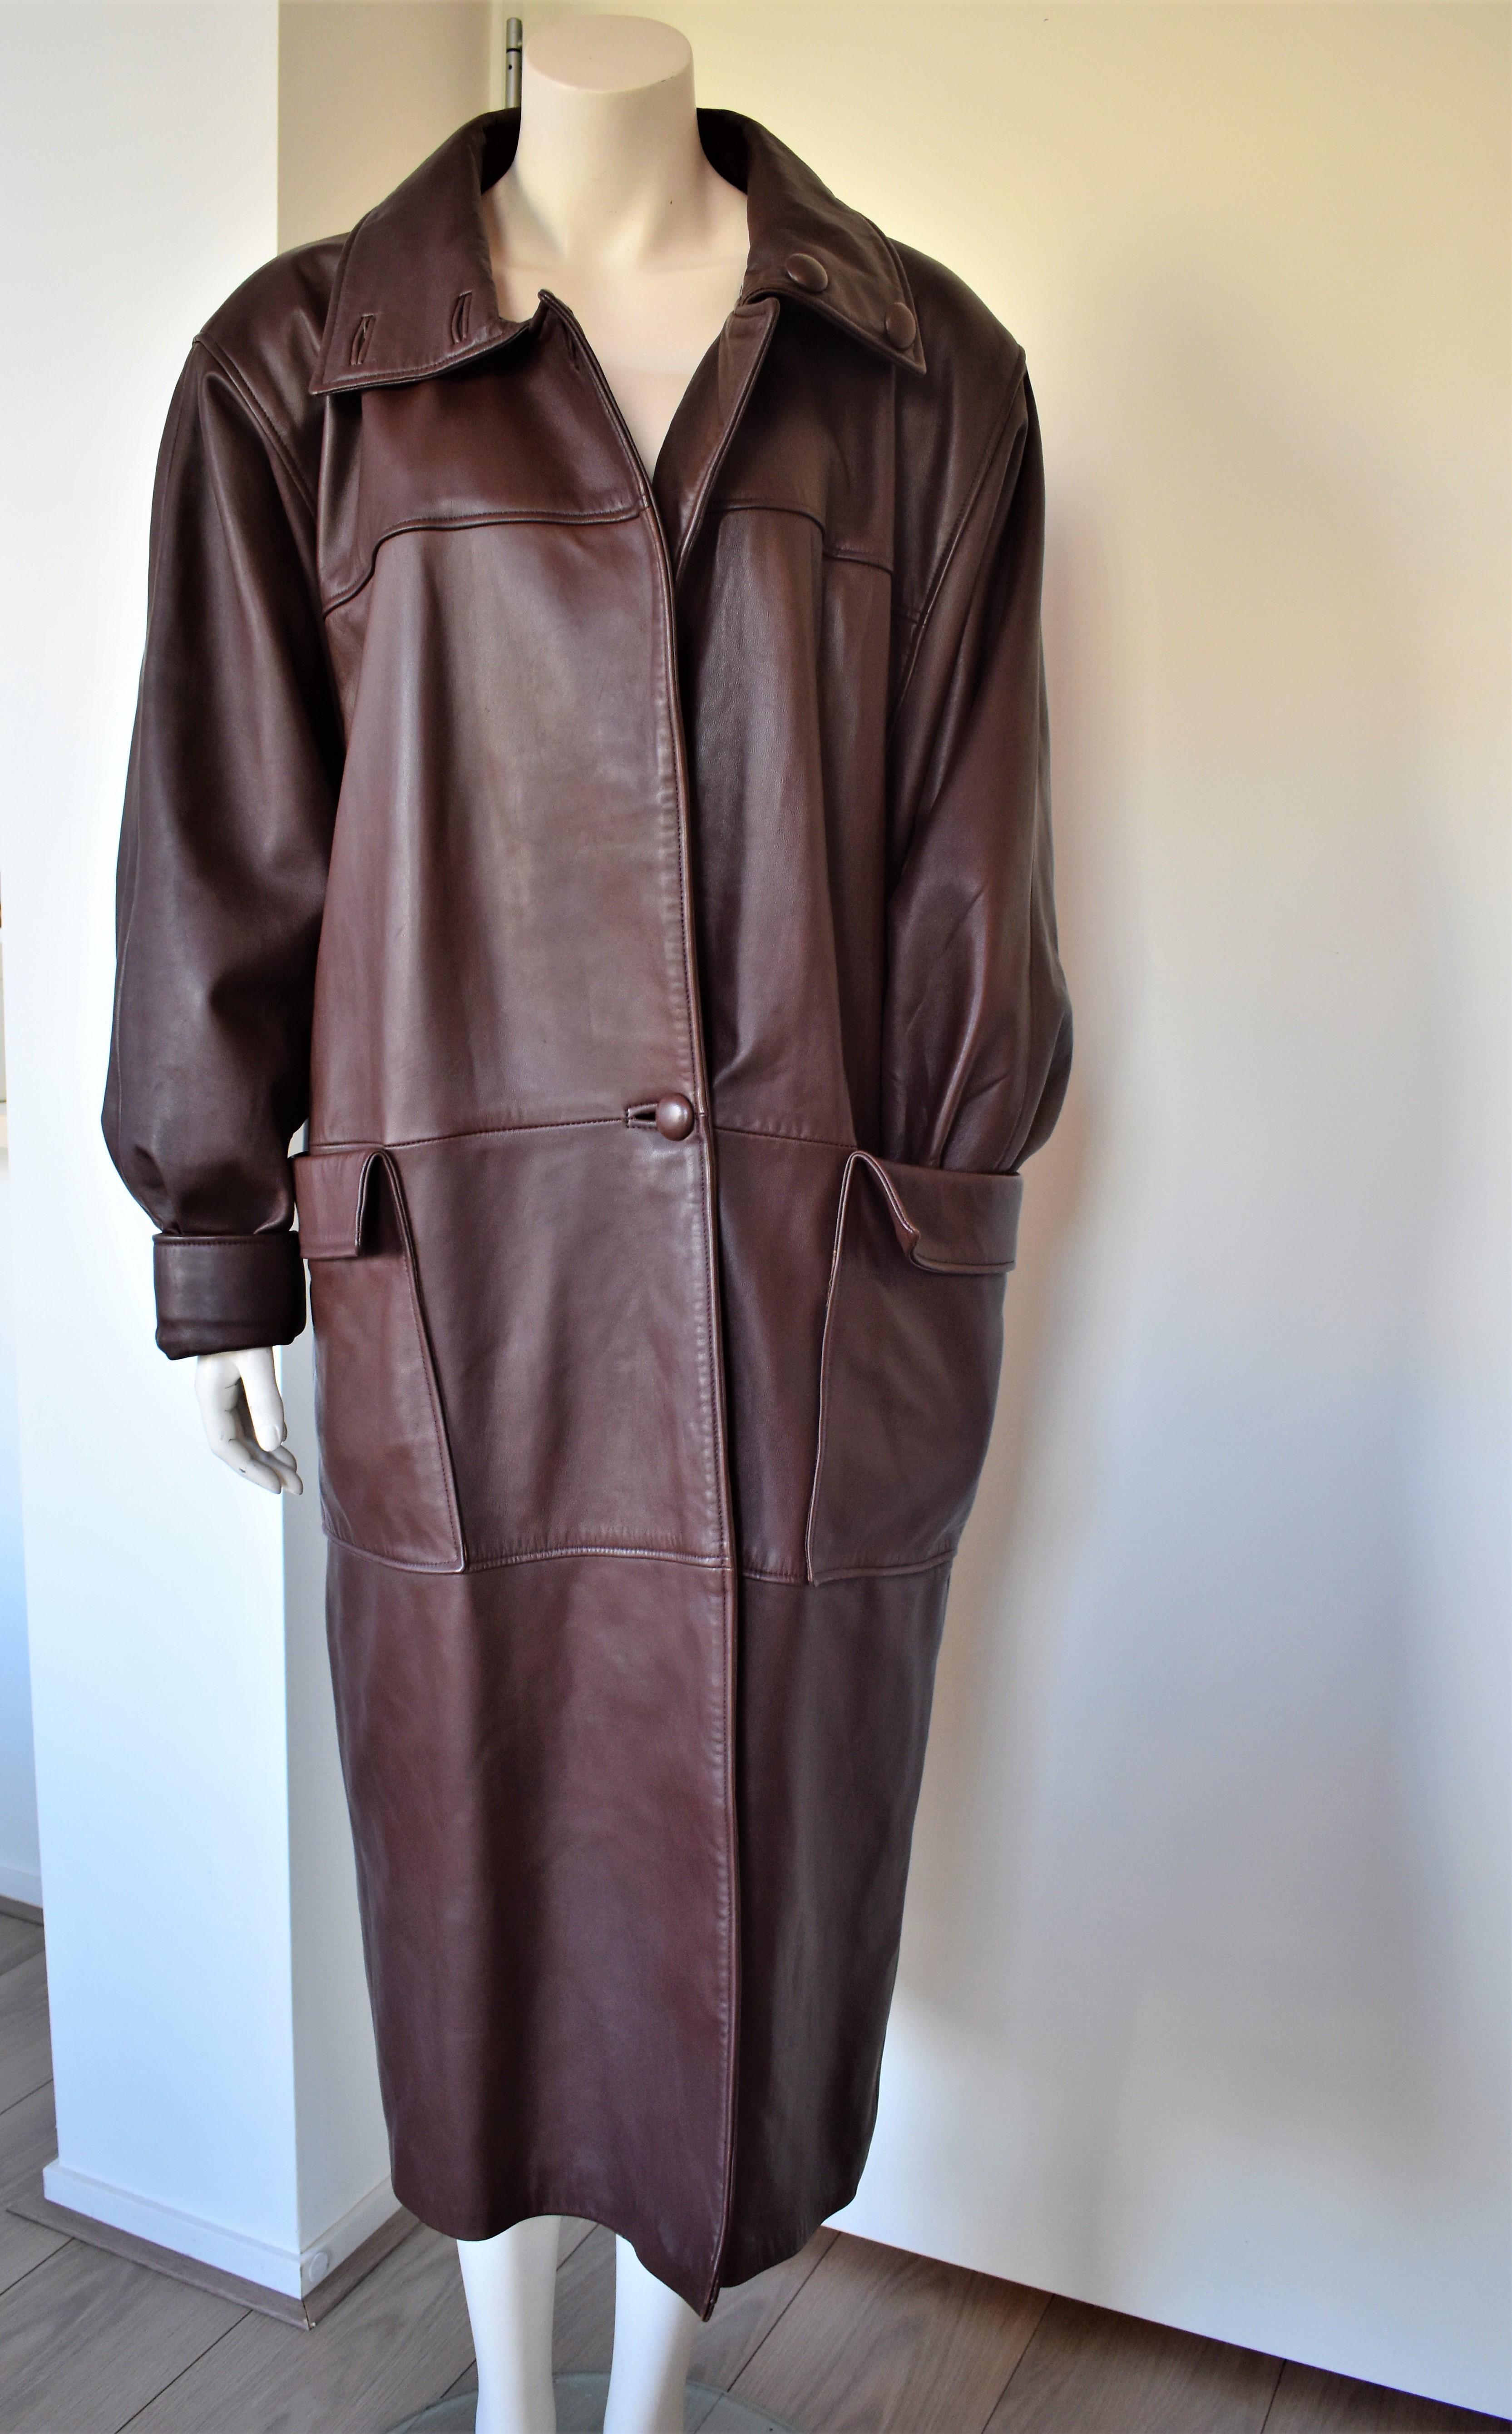 Black Chocolate Brown Leather Coat by Carven Paris